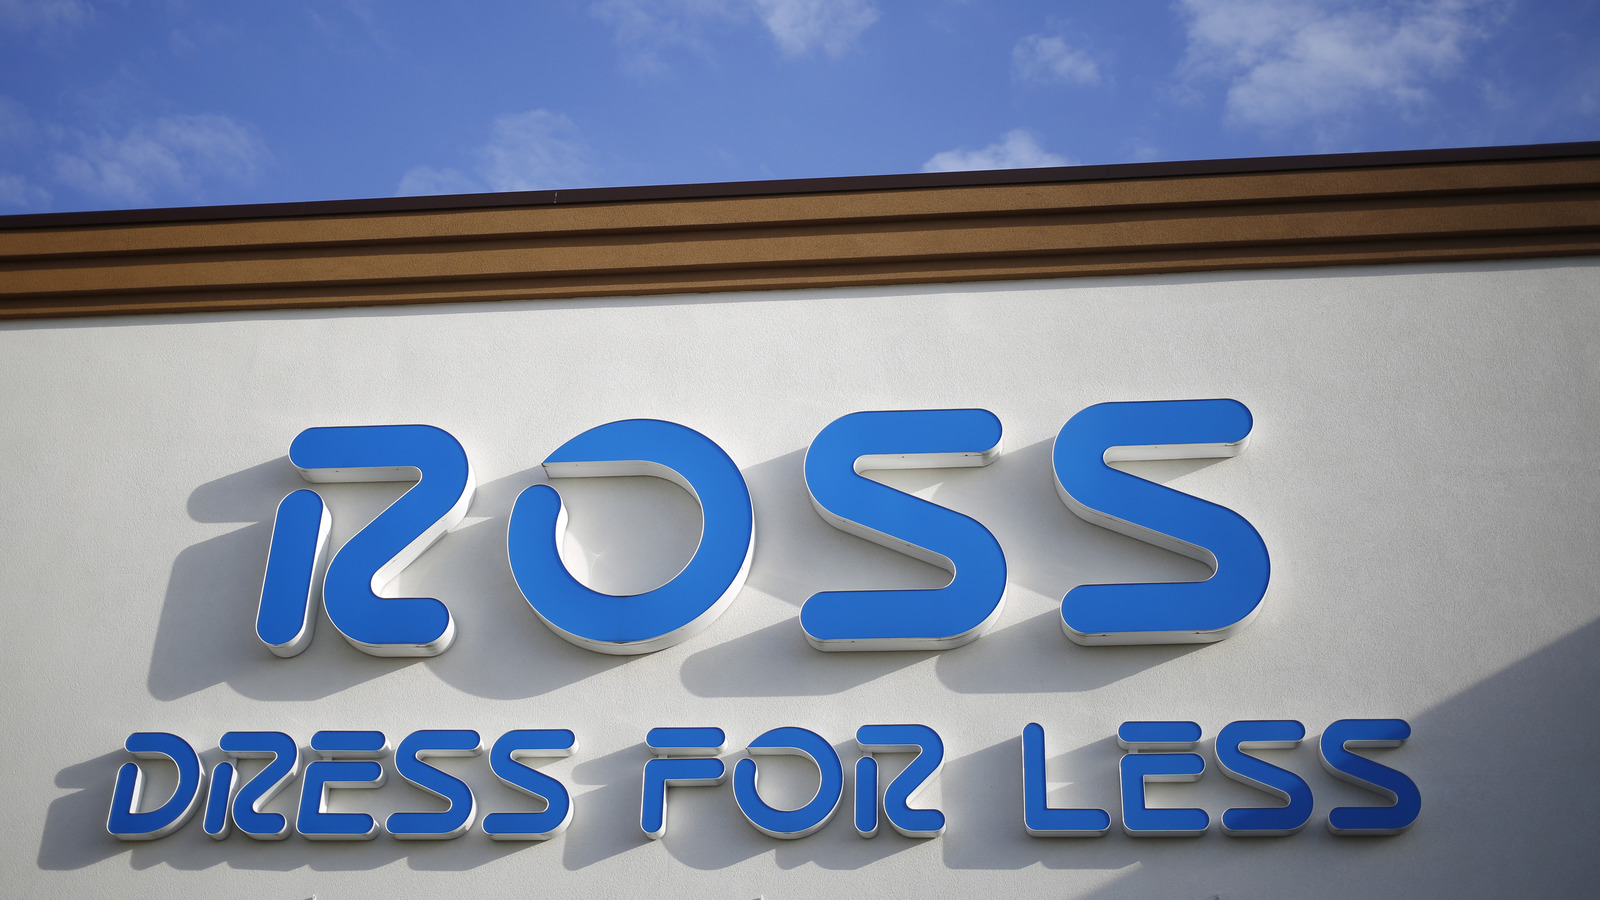 ROSS DRESS for LESS designers handbags , shoes and jewelry. - YouTube